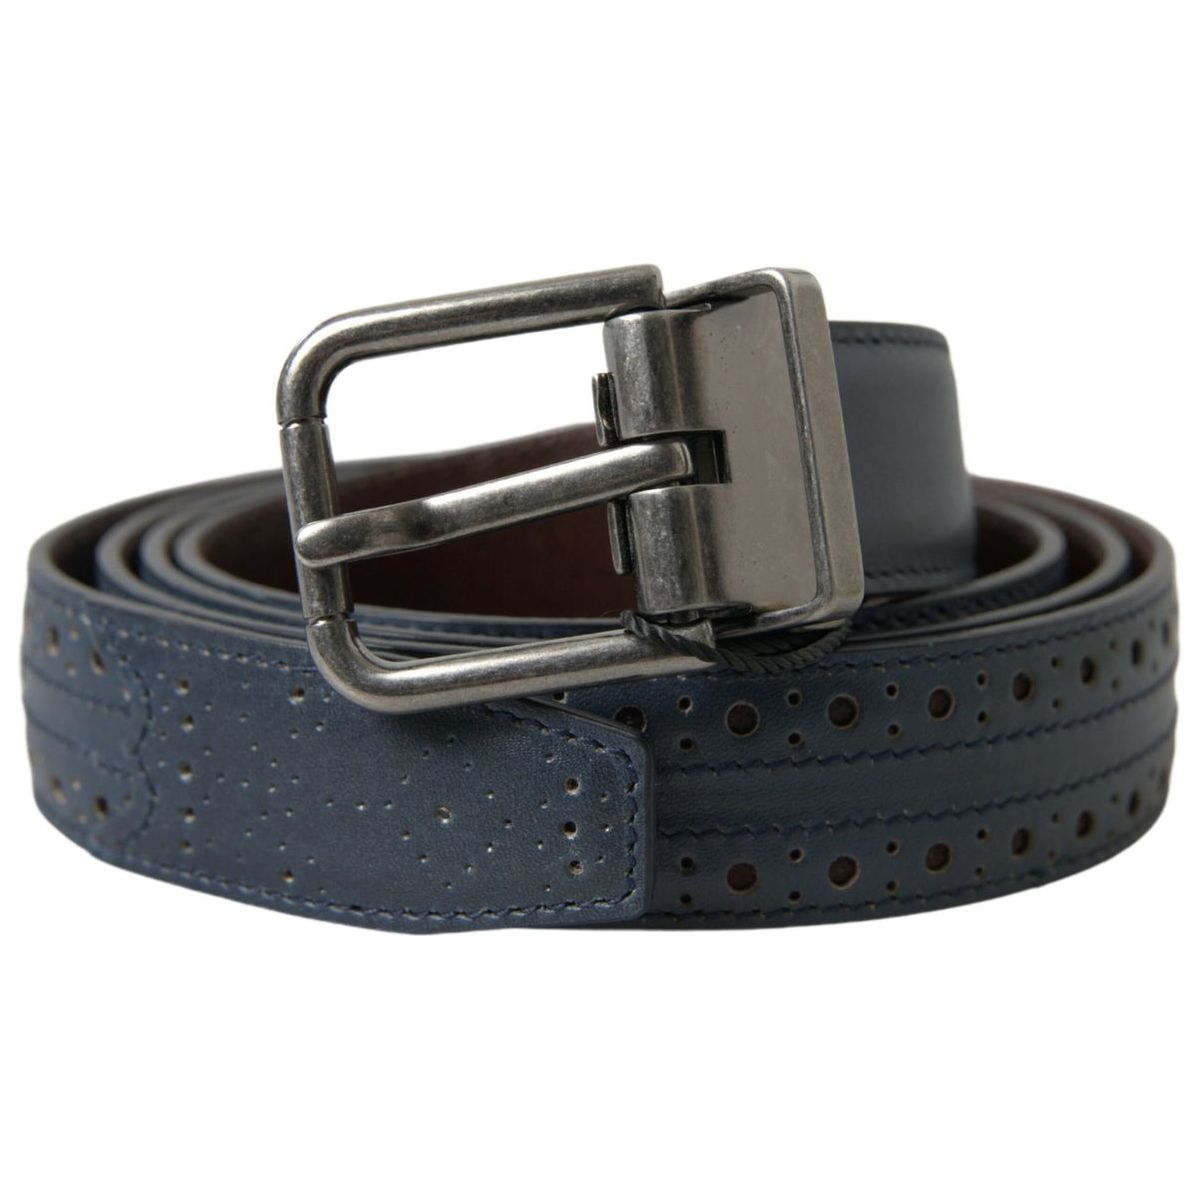 Dolce & Gabbana Elegant Blue Leather Belt with Metal Buckle MAN BELTS blue-leather-perforated-metal-buckle-belt 465A5247-scaled-cf5a5543-00f.jpg